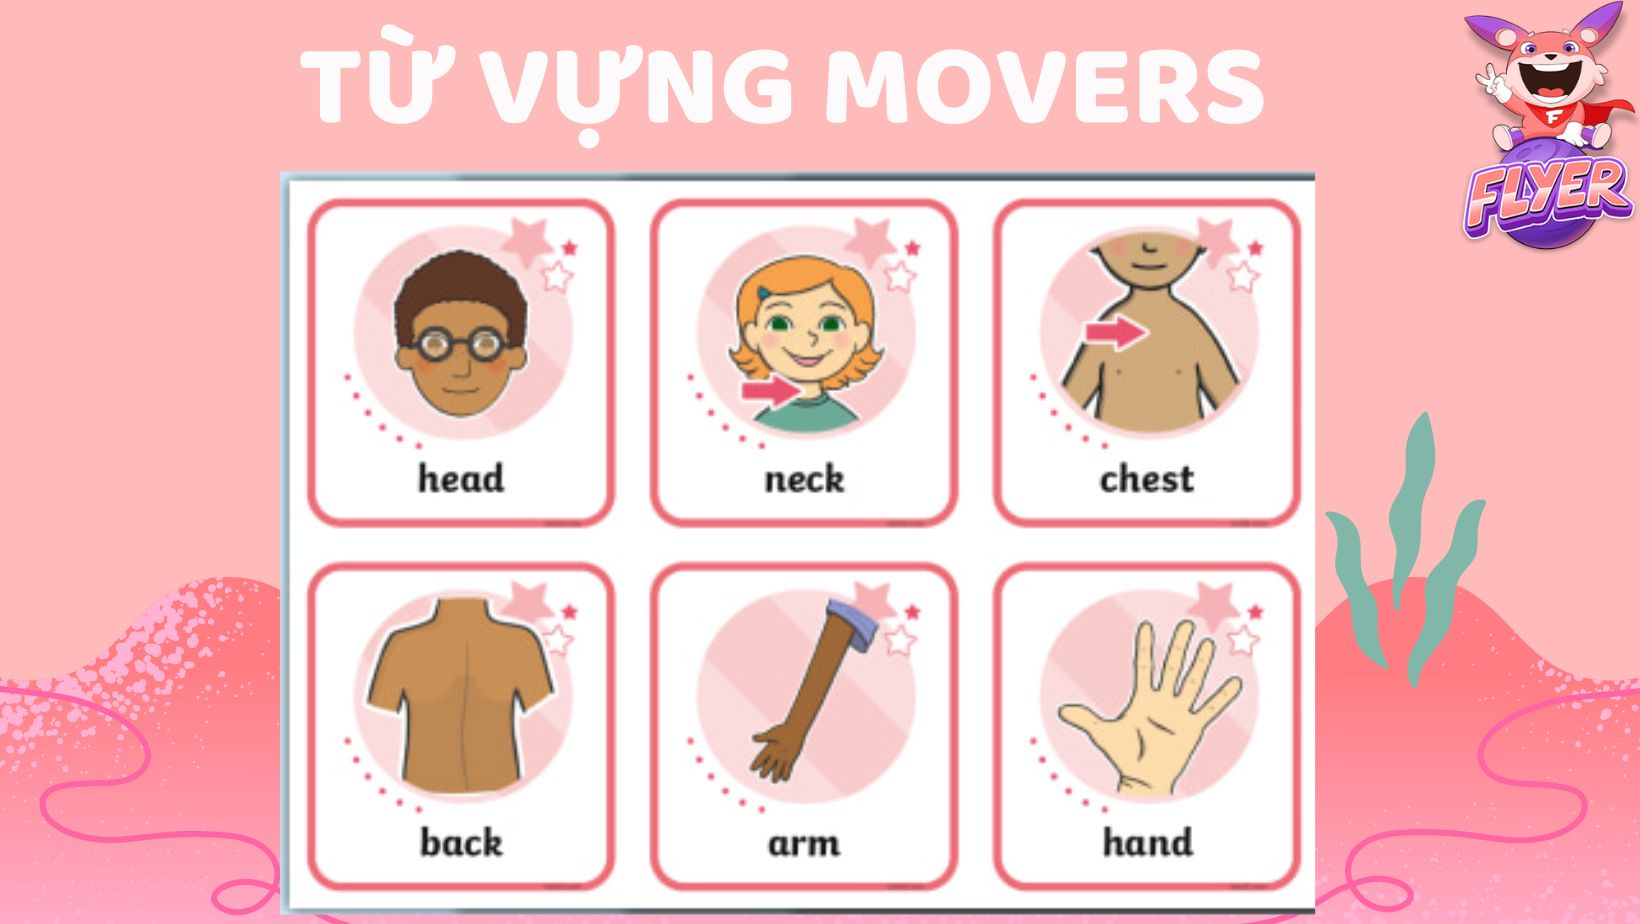 Từ vựng Movers Cambridge The body and the face